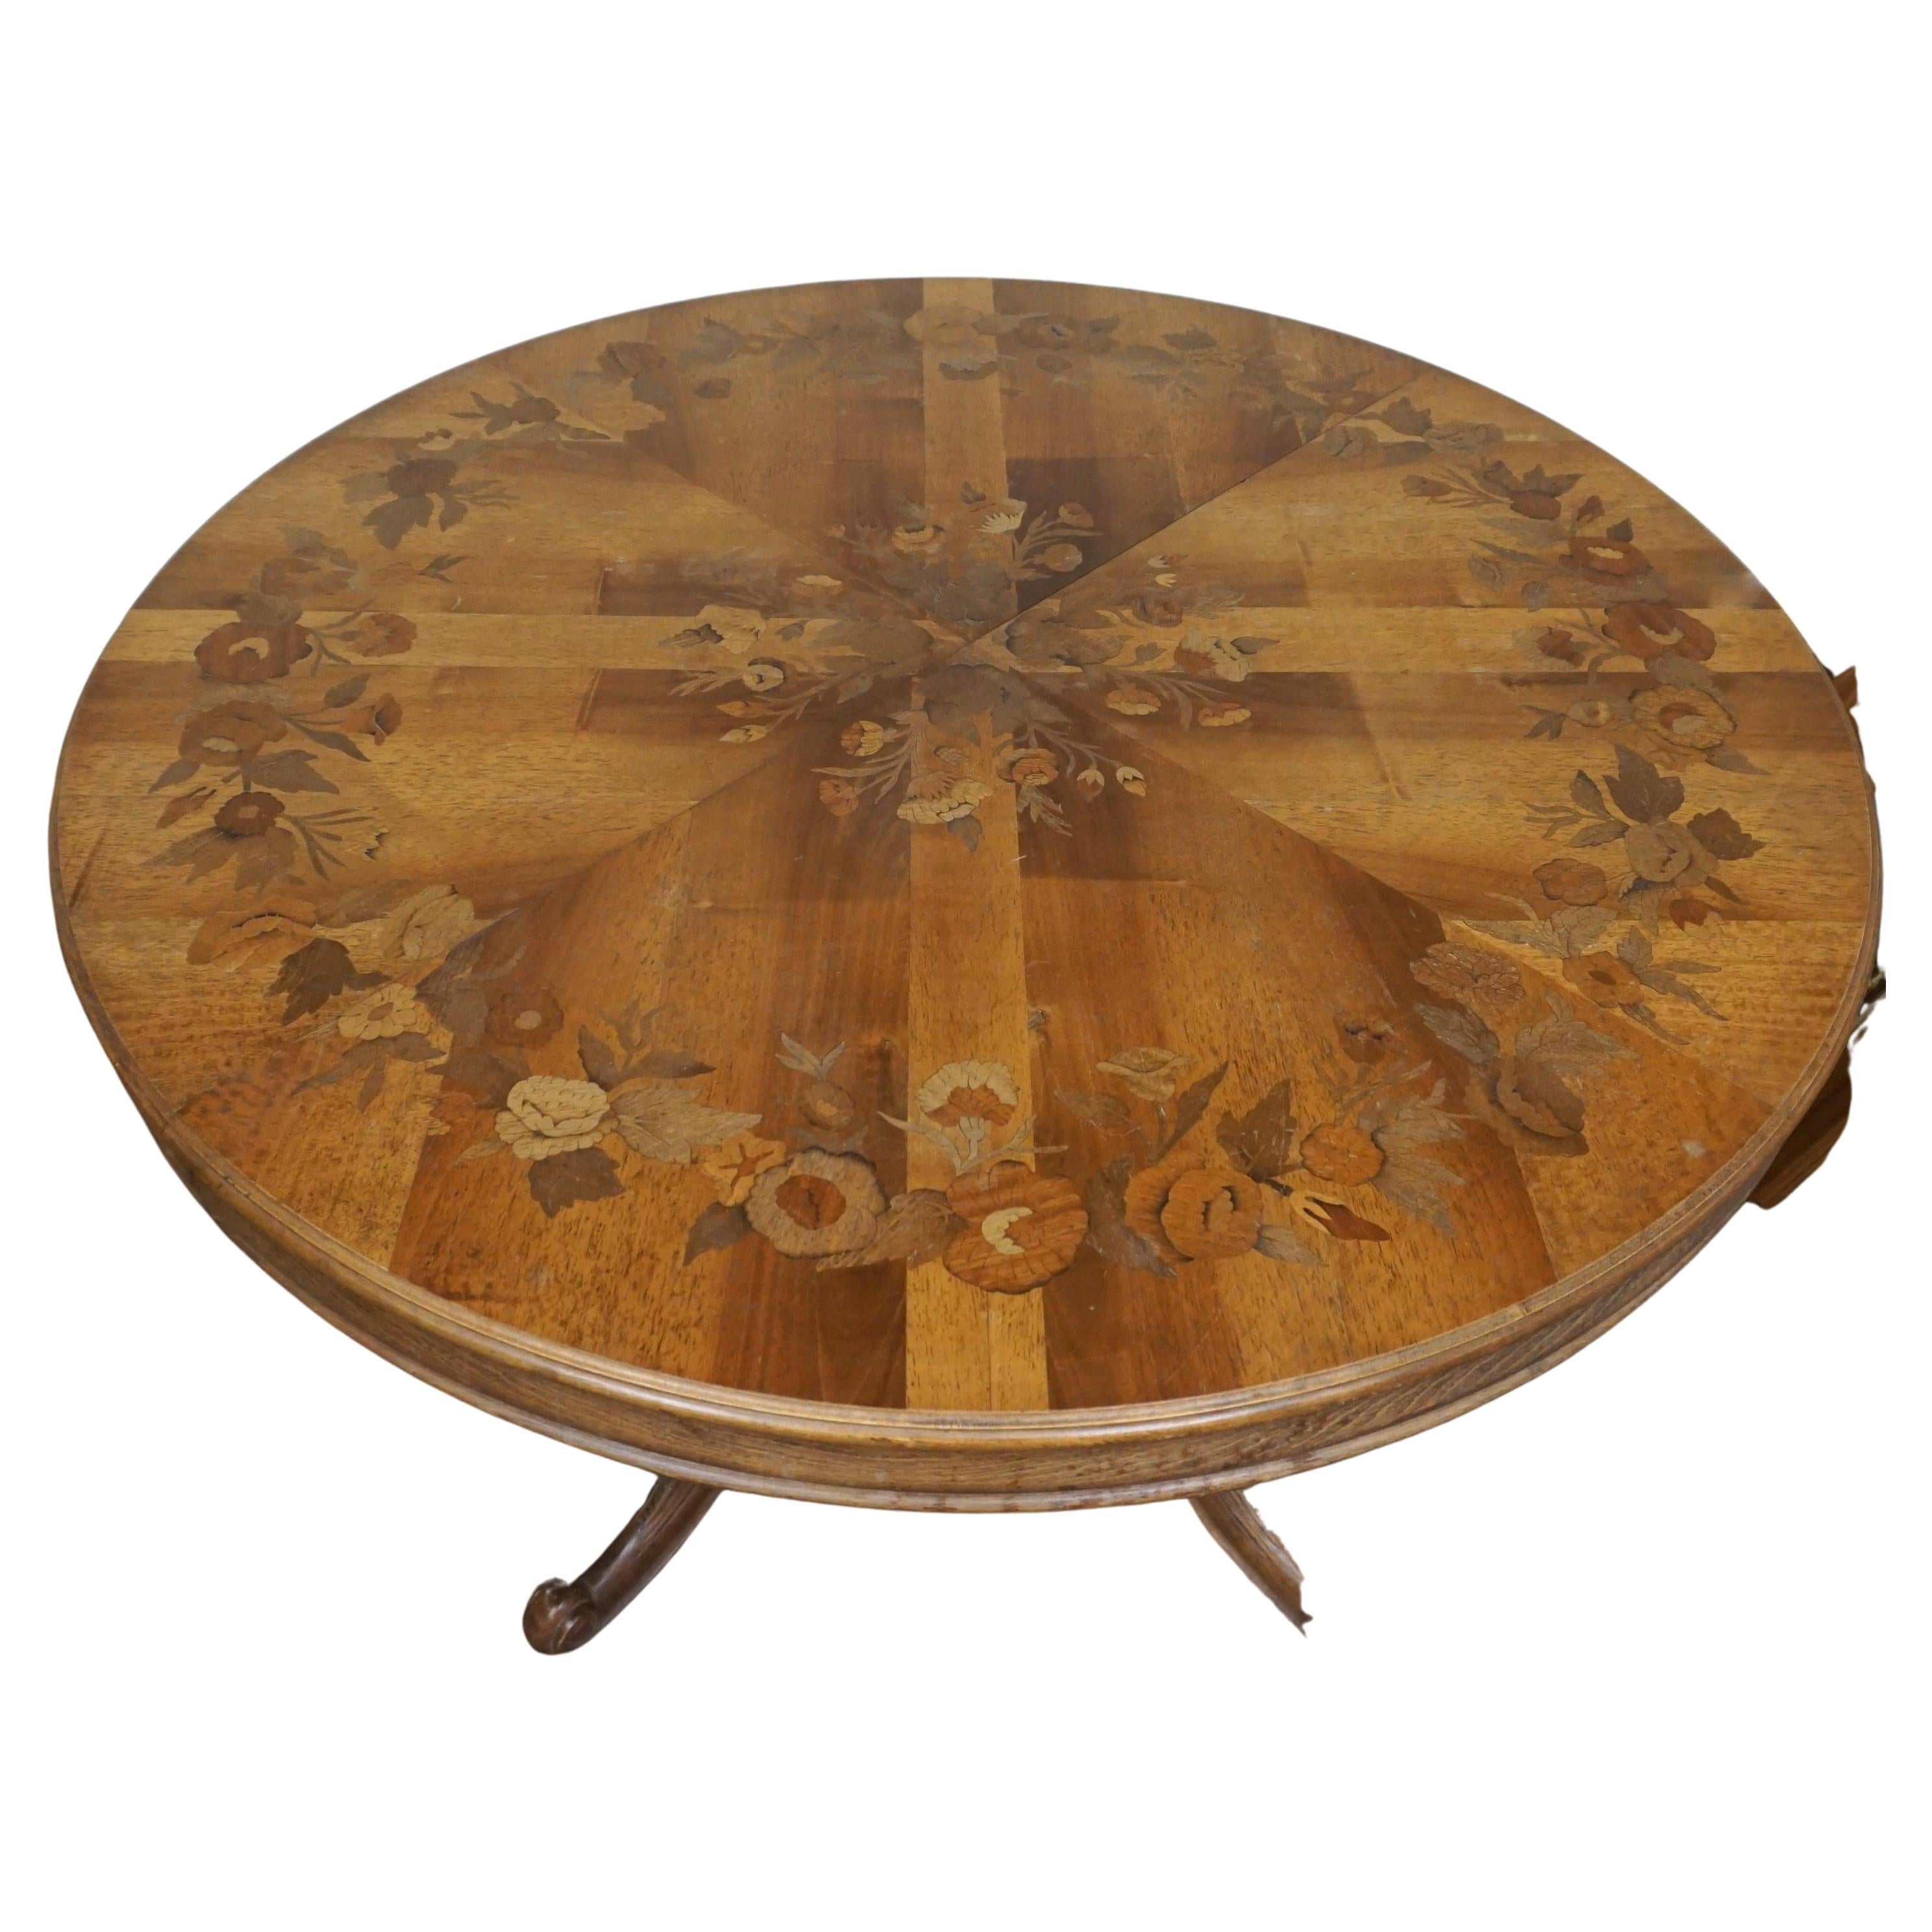 French Provincial Marquetry Inlaid Mixed Fruitwood Breakfast / Dining Table For Sale 7